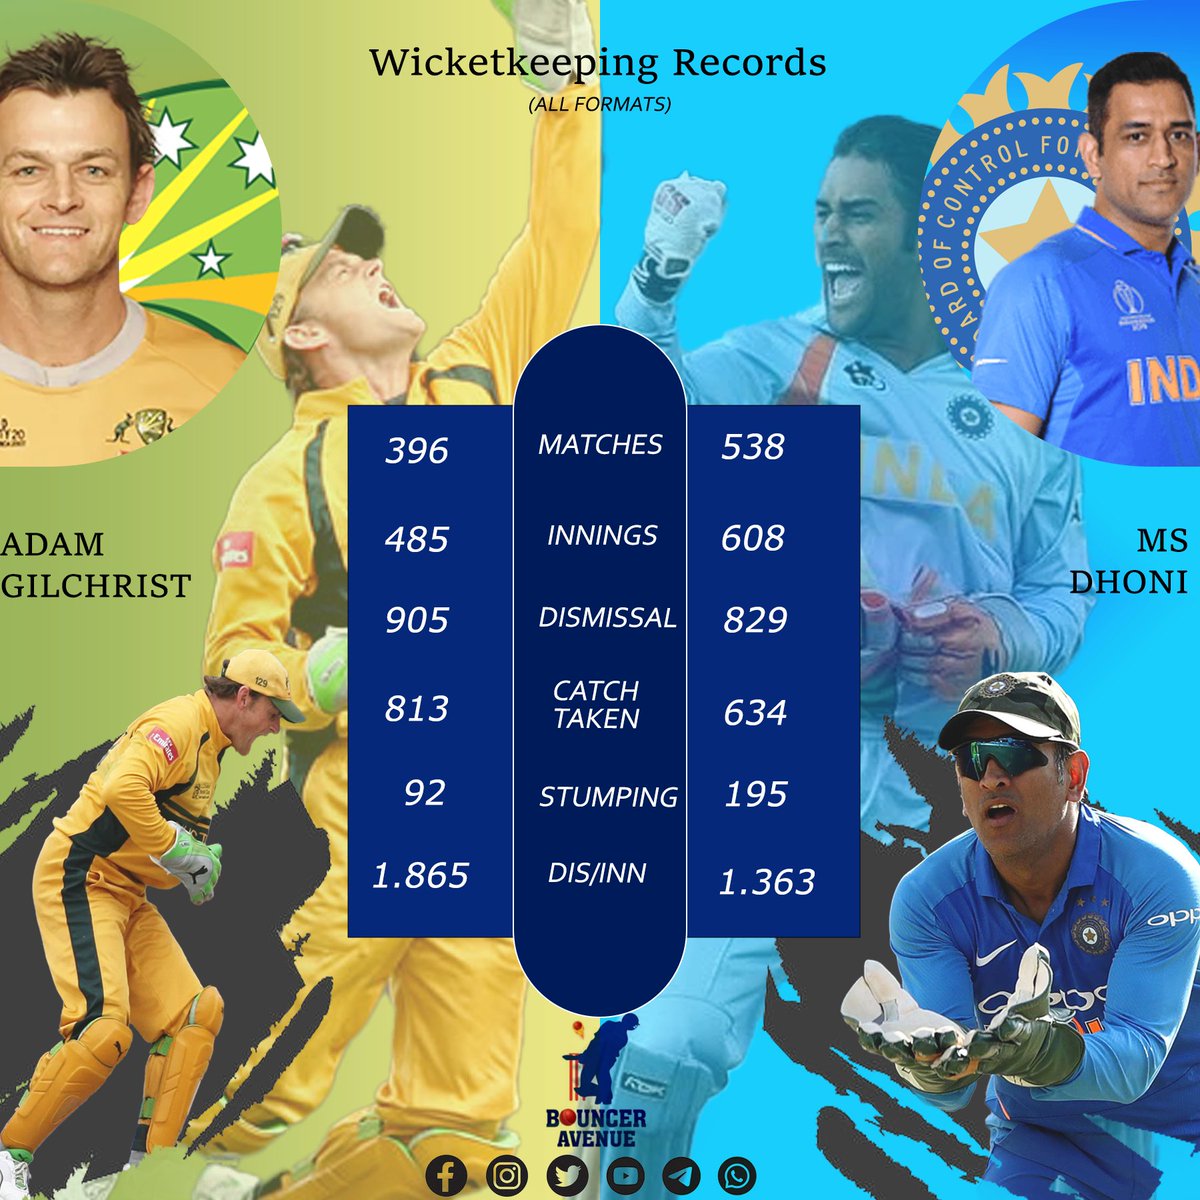 Adam Gilchrist vs Mahendra Singh Dhoni. Let's look at their wicket keeping numbers !!

#Cricket #CricketTwitter
#MahendrasinghDhoni #Mahi #Dhoni #Thala #CSK #Gilchrist #Gilly #Cricketaustralia #WTC #ICC #ICT #BCCI #Cricketstats #cricketlovers #Cricketnews #Legends